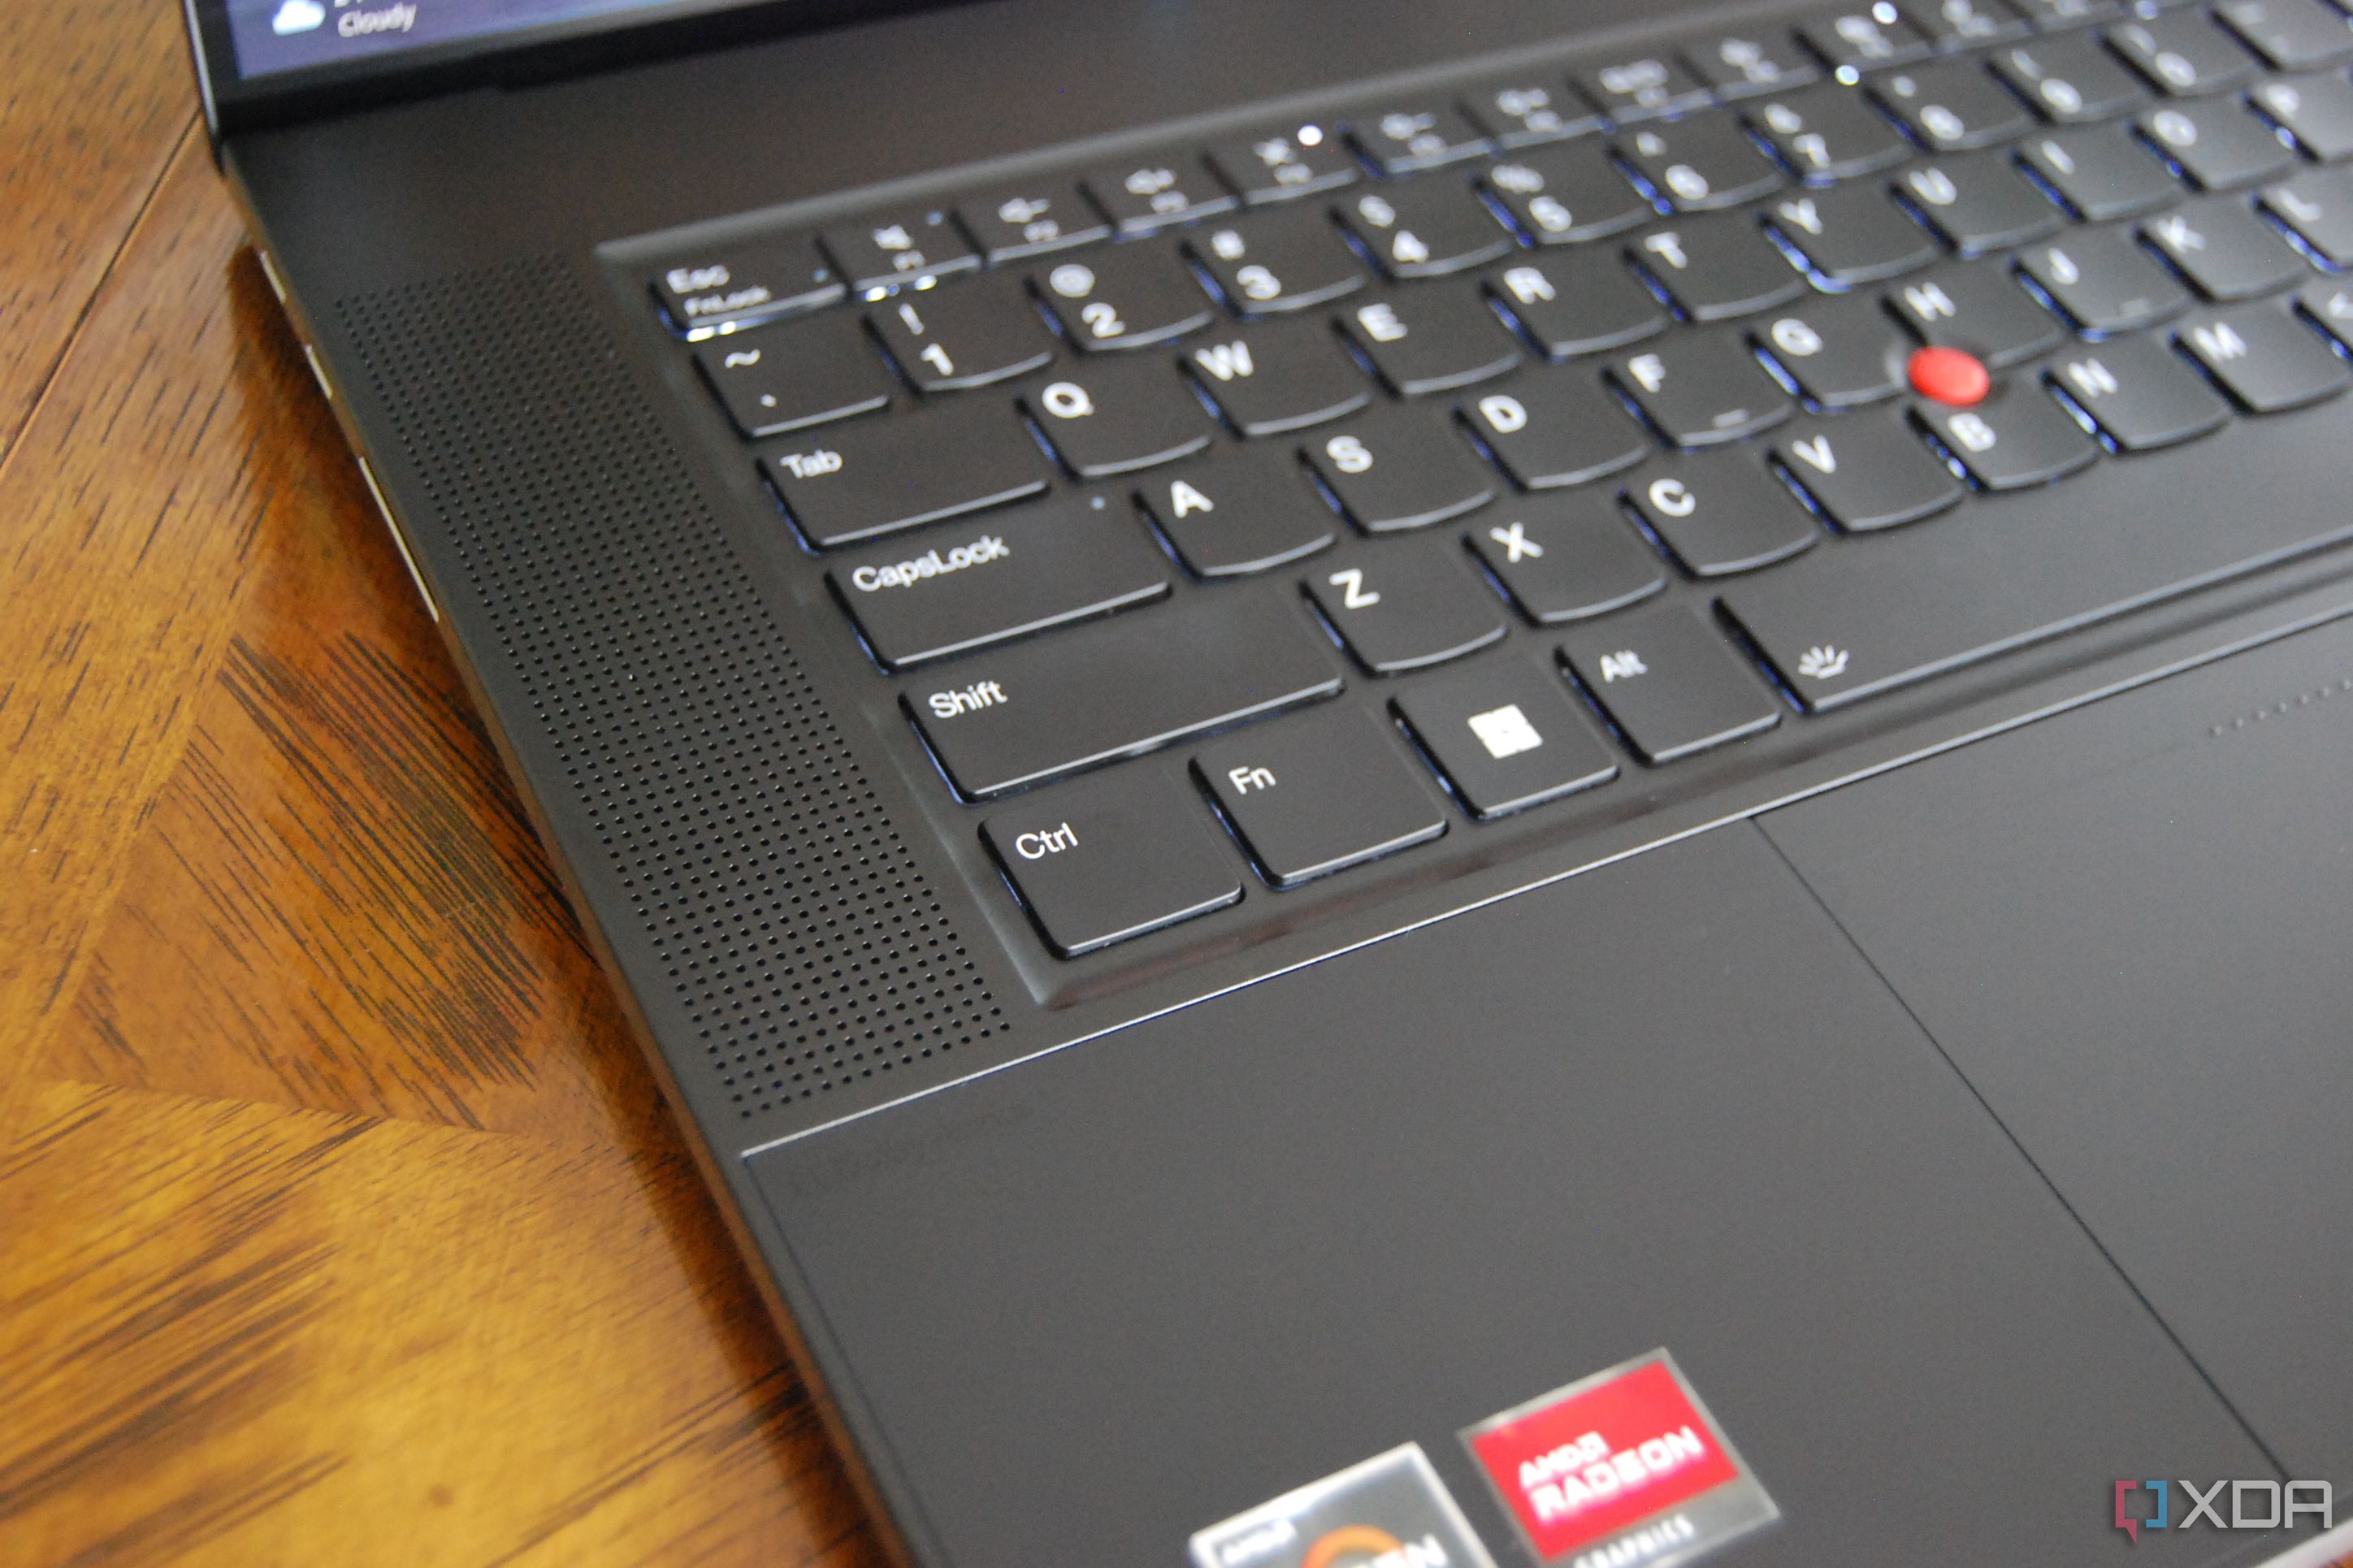 Lenovo ThinkPad Z16 Gen 2 review: Does it beat the M3 MacBook Pro?